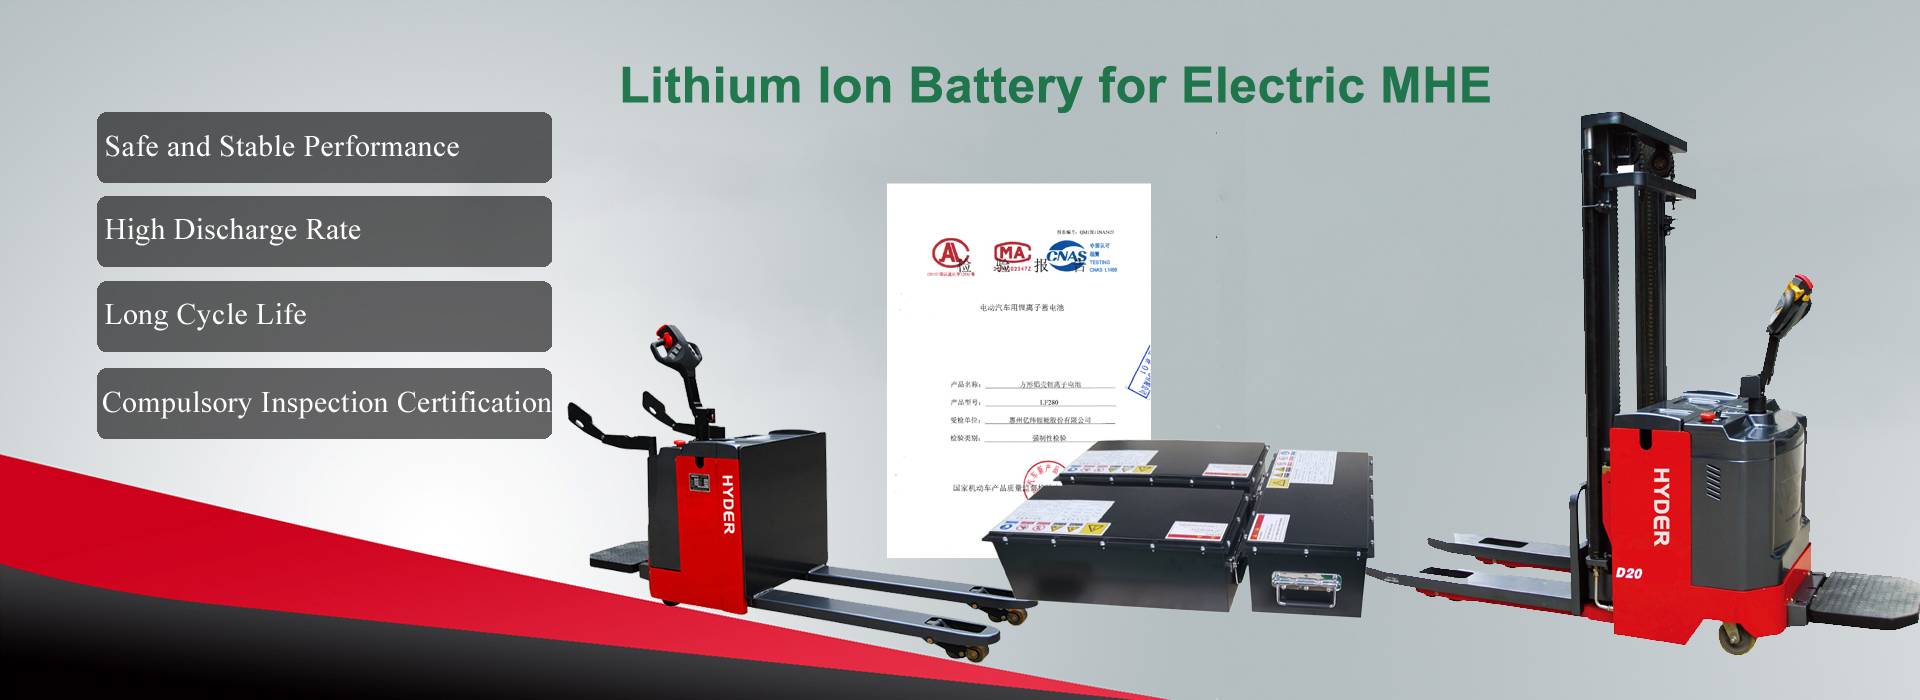 10-year experience Forklift &warehouse equipment manufacturer,Hyder lithium  ion battery for electric forklift and other electric warehouse machines